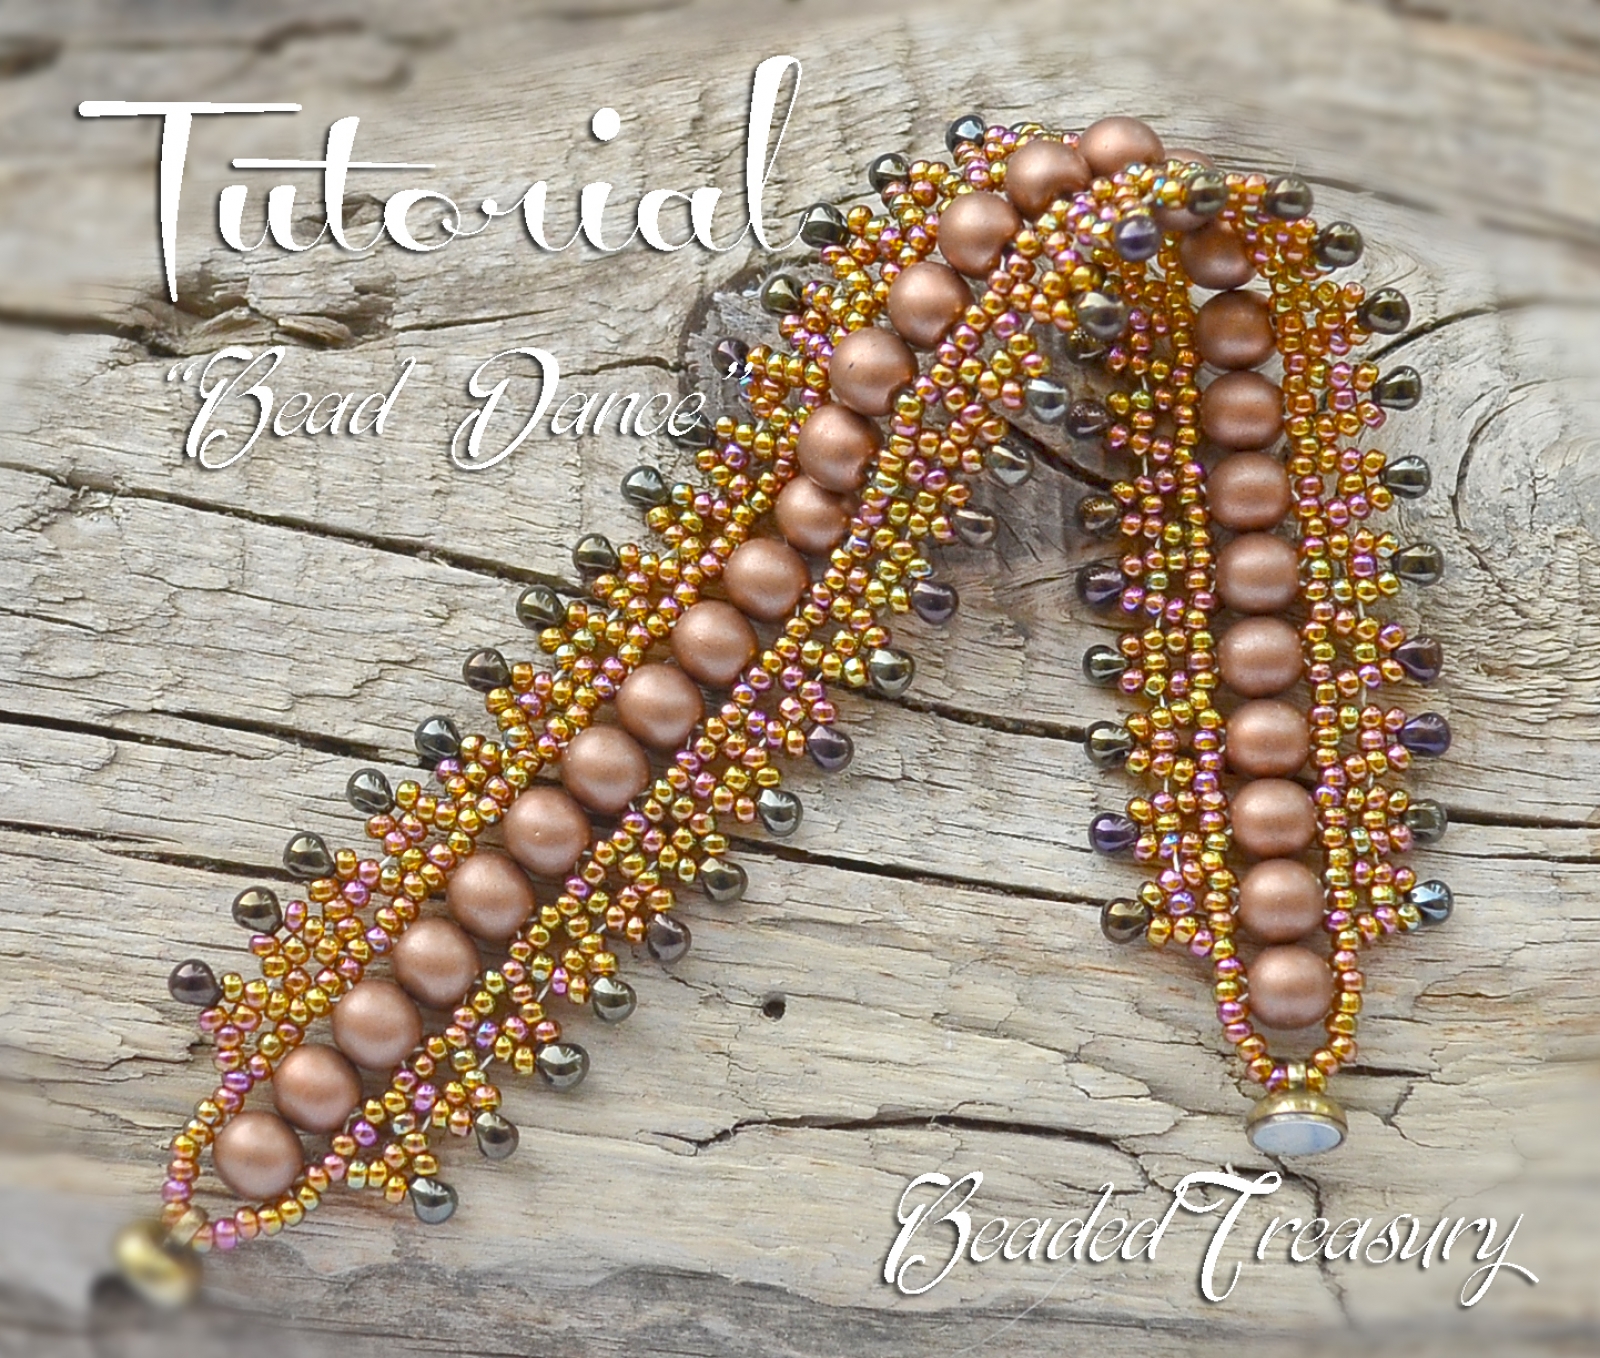 You can make this beading pattern in 10 minutes. Seed beads